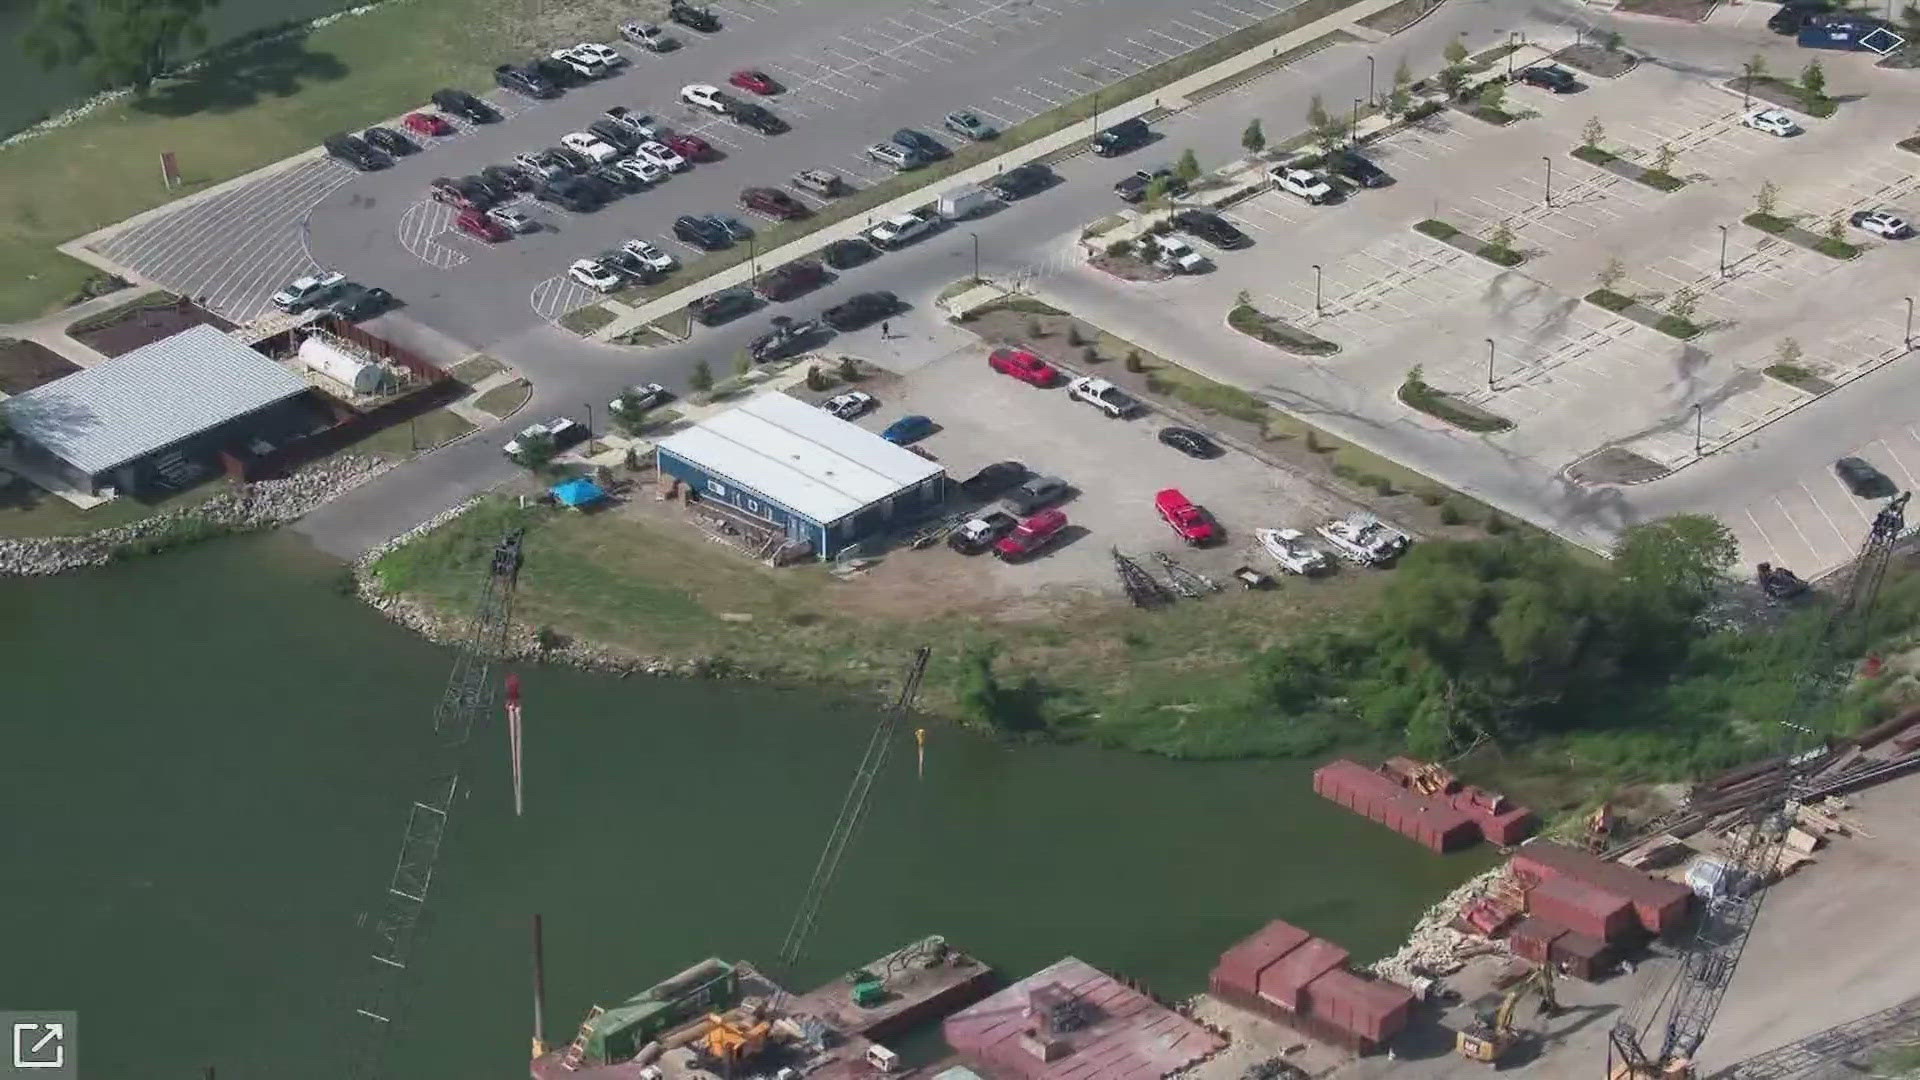 Dallas Fire-Rescue said they responded to a 911 call shortly before 8 p.m. reporting multiple people had jumped into the lake from a boat, but two didn't resurface.